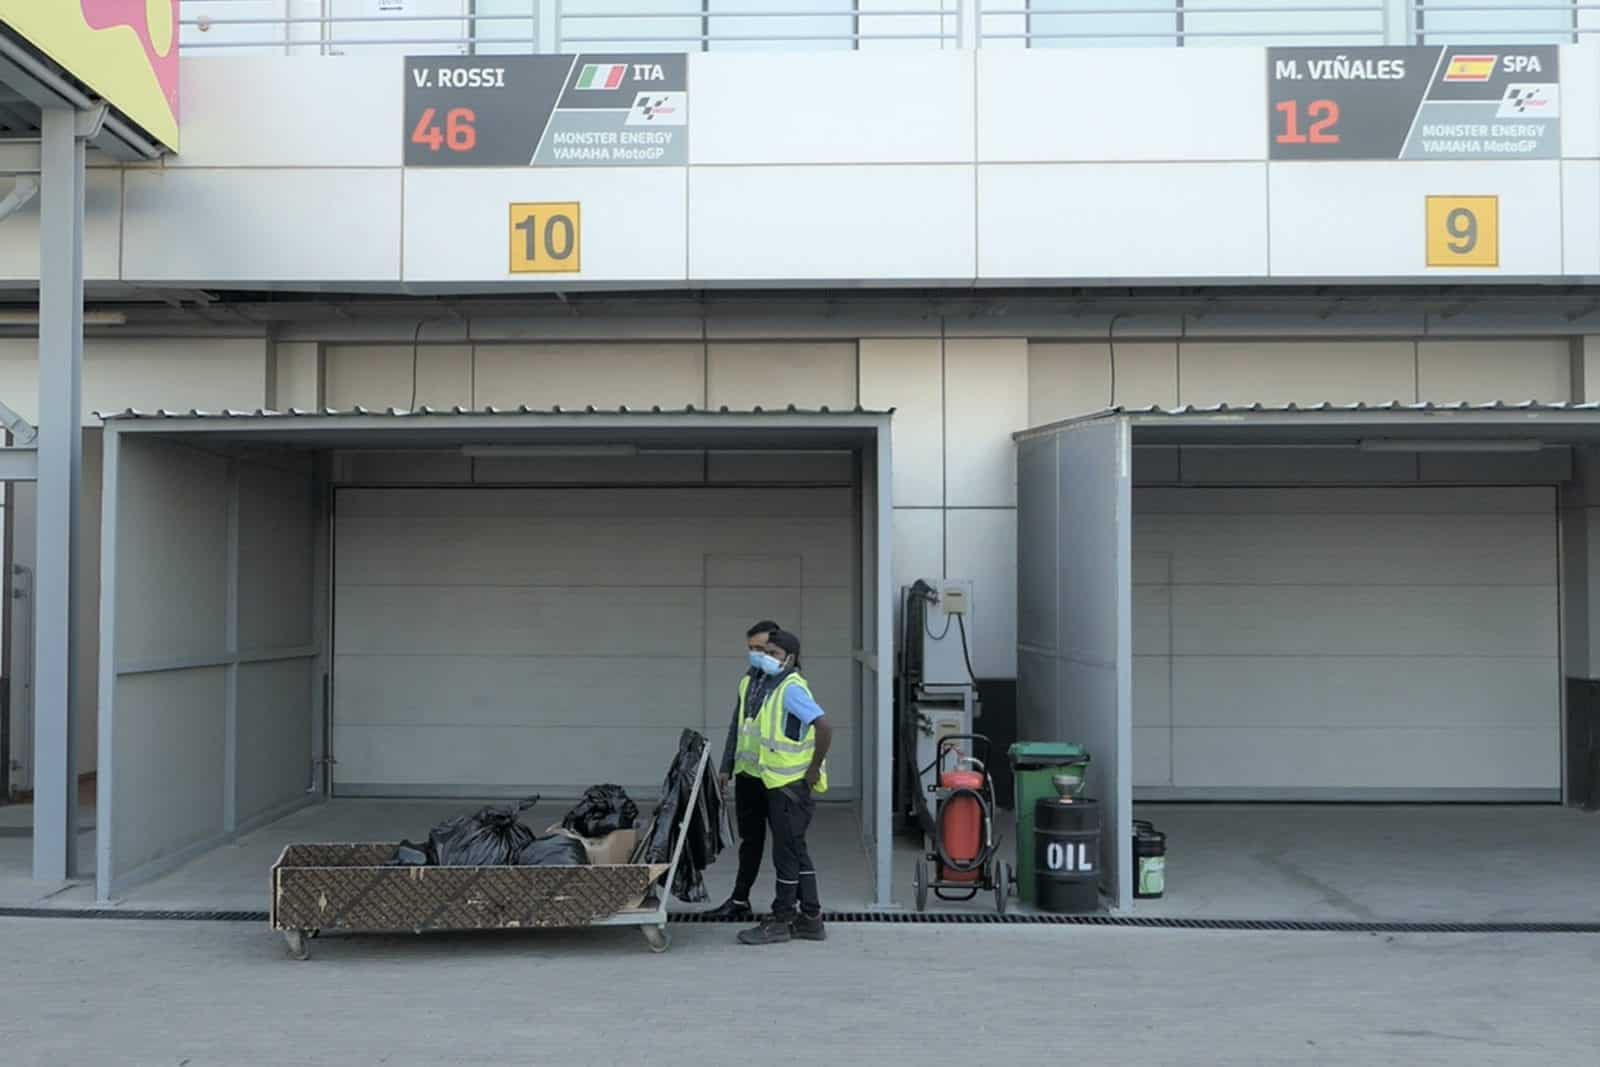 Workers clear out pit garages uring the 2020 MotoGP Qatar Grand Prix